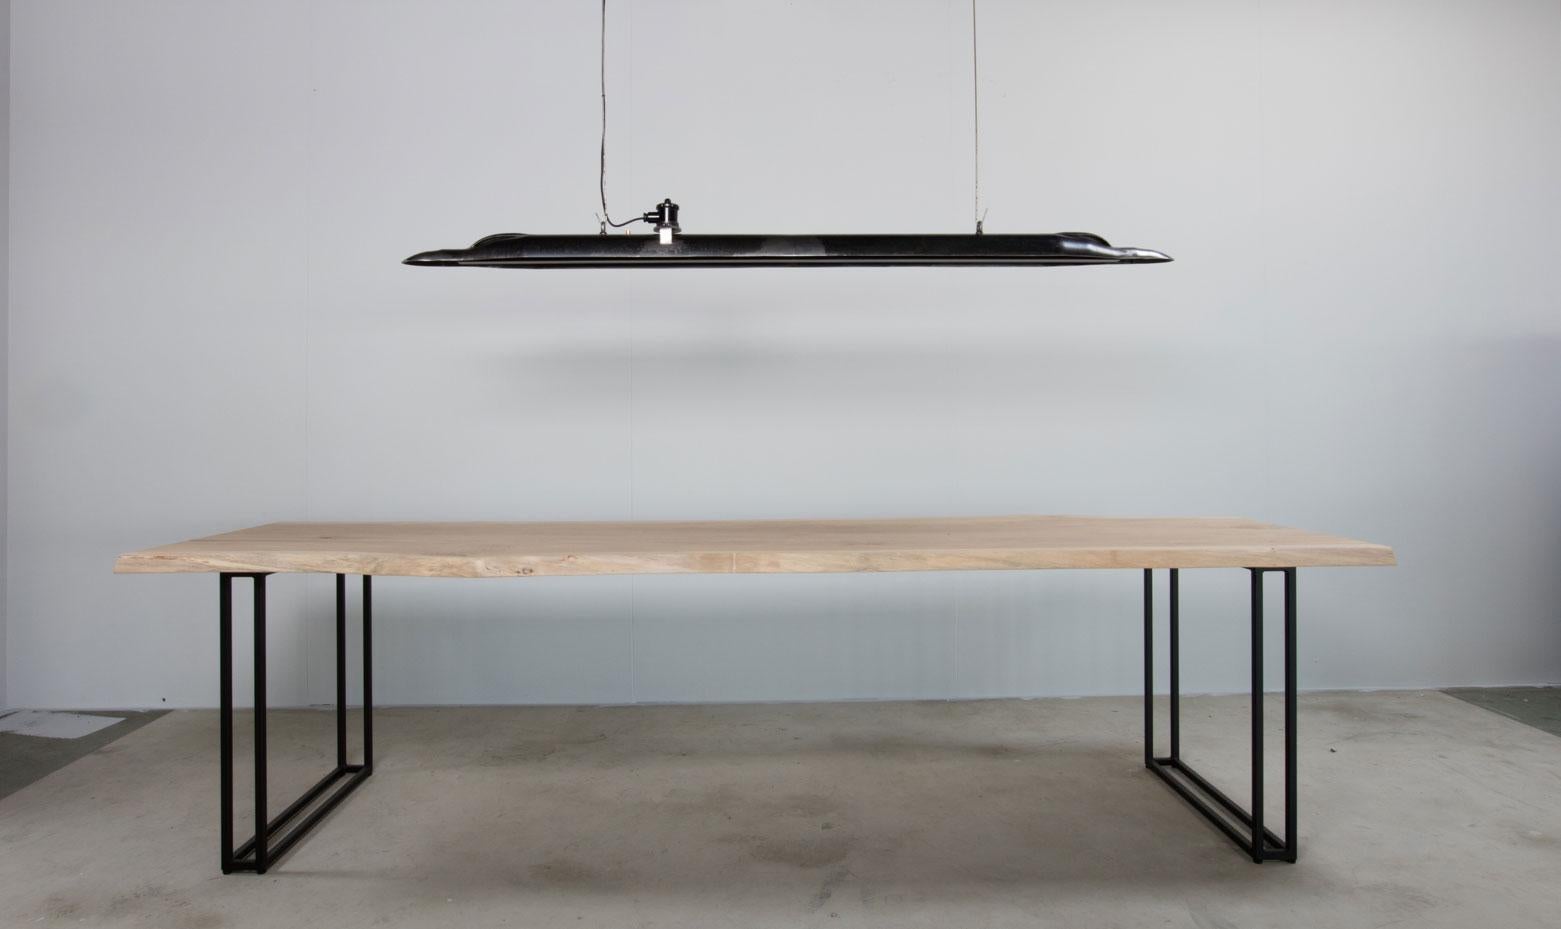 Altar table by Jesse Sanderson & Jorn Valk
Dimensions: Width 80 - 90 x H 75 cm
Thickness 3,5 - 4,5 cm
Materials: Matt black or Natural steel
Available in free flow or clean cut

Nature is full of wonderful and beautiful phenomena, which create